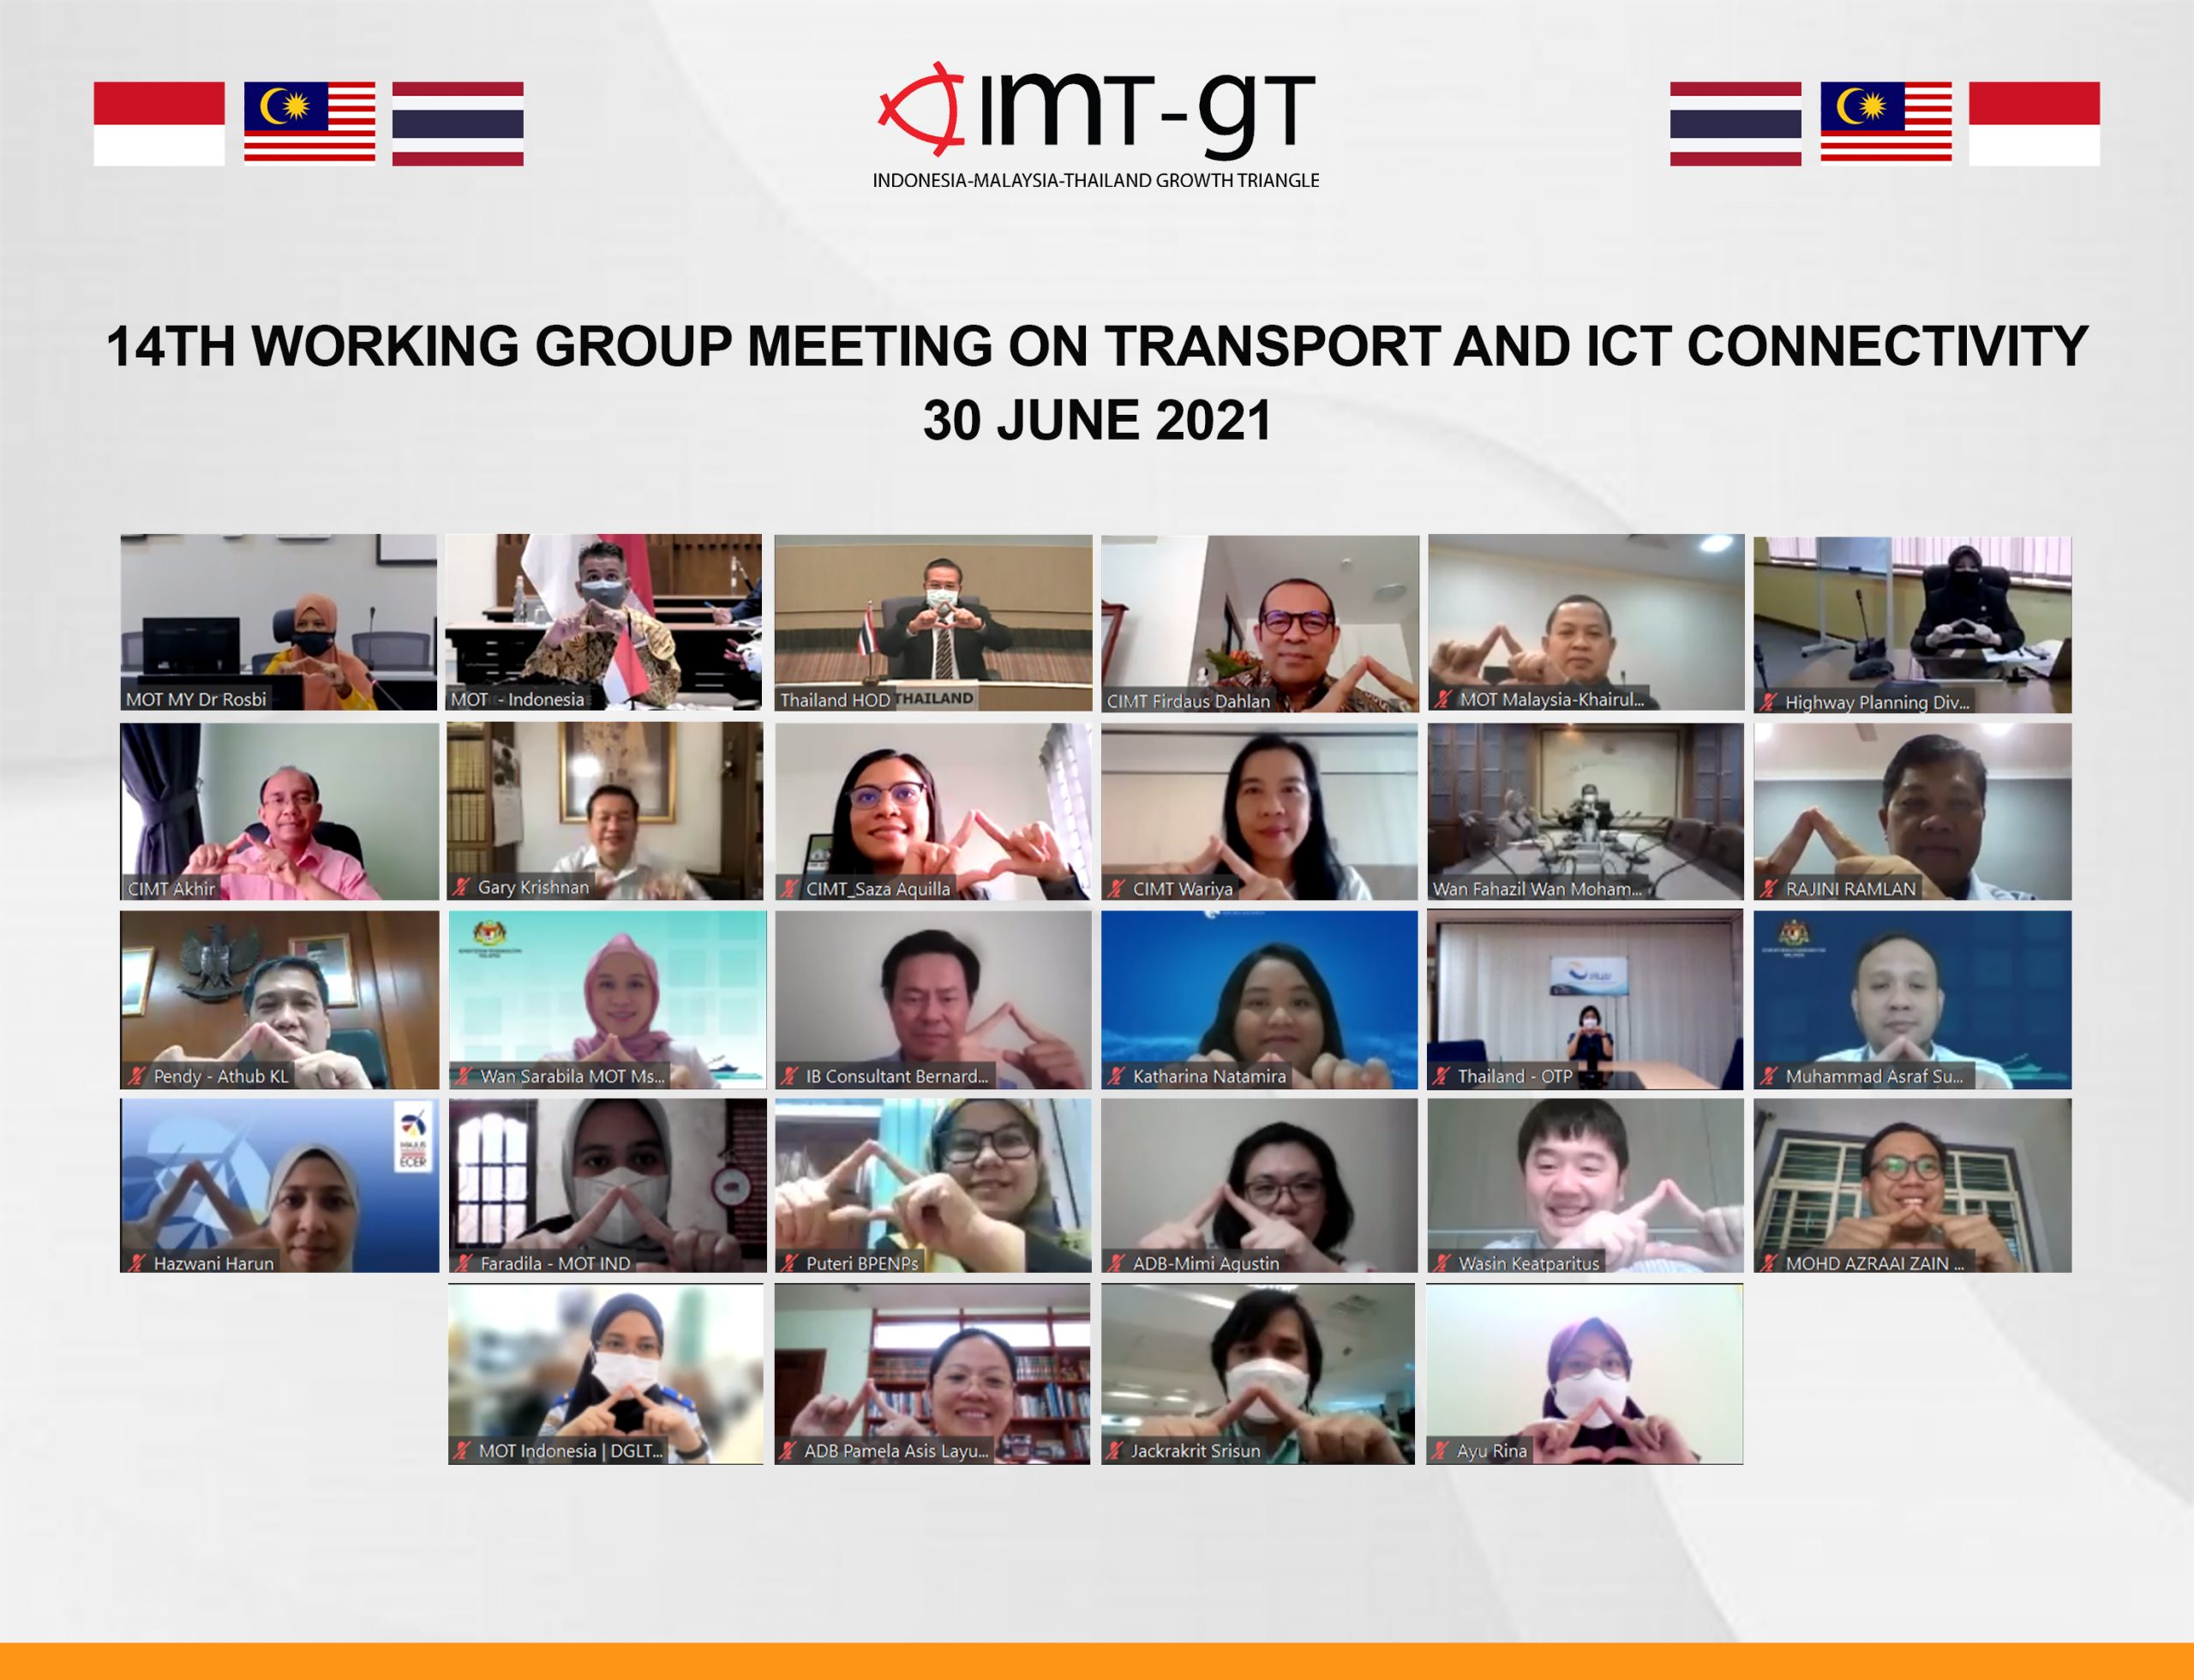 13th IMT-GT Working Group Meeting on Transport and ICT Connectivity